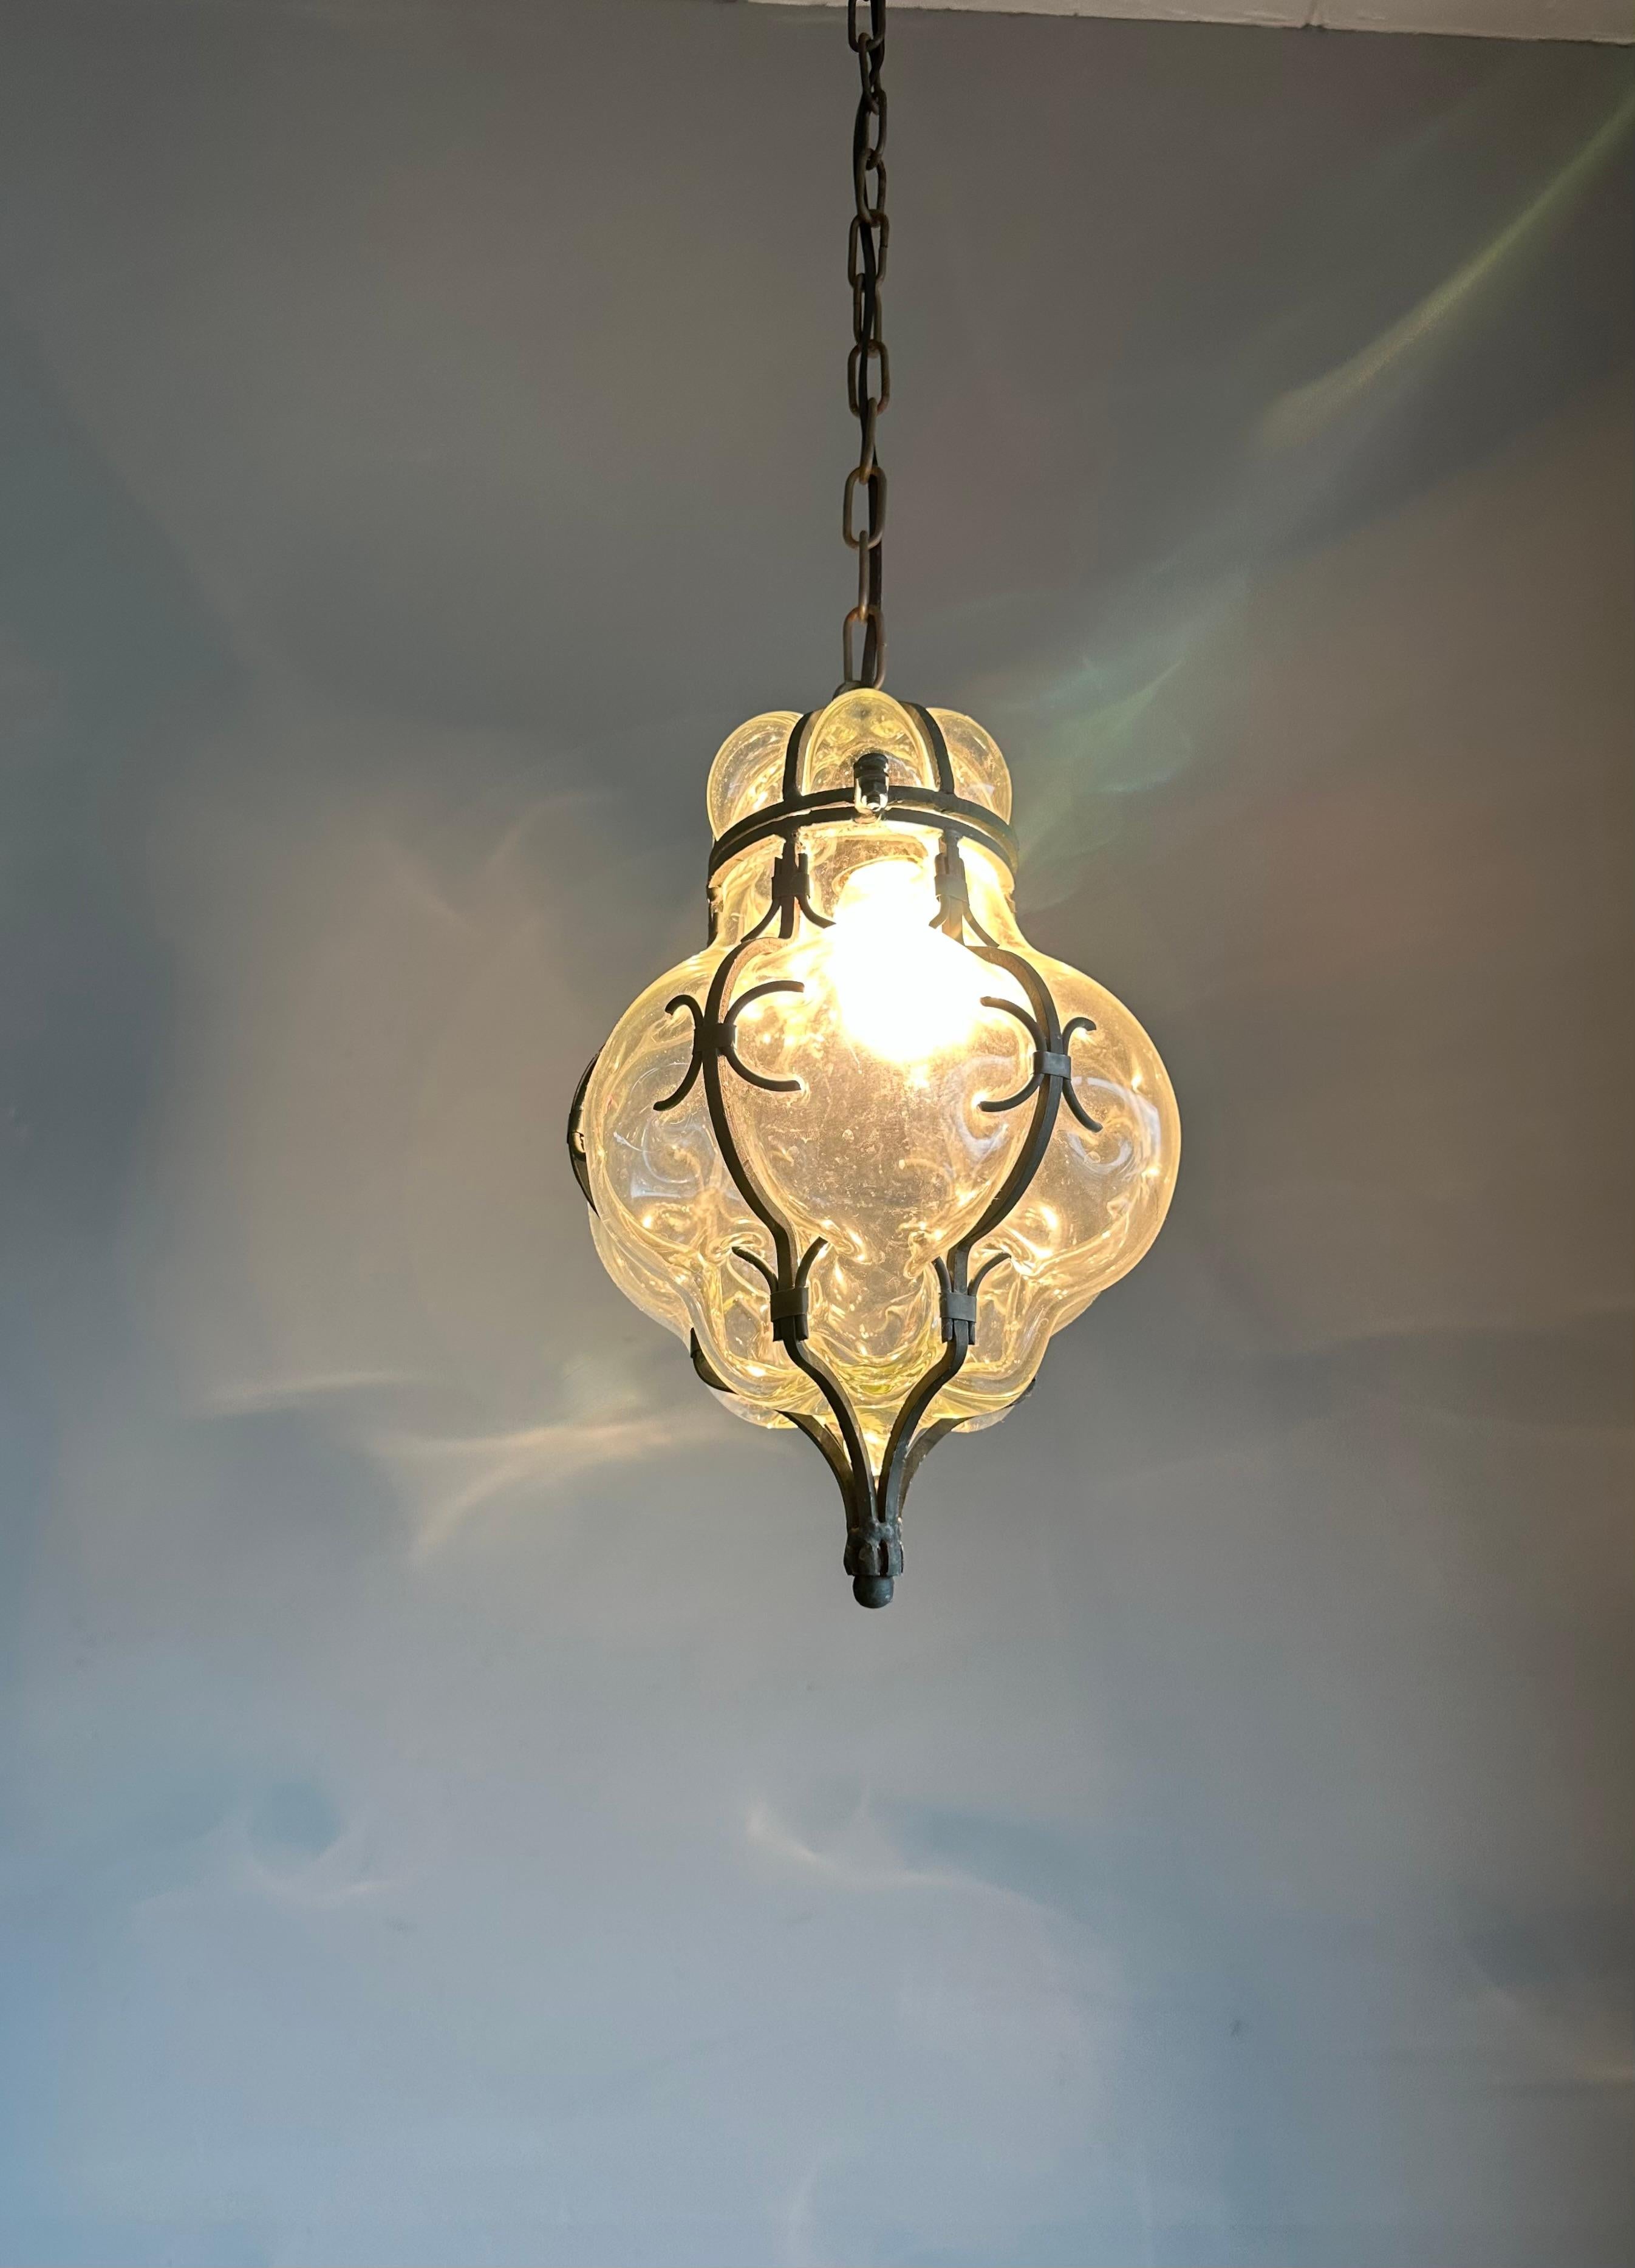 Hand-Crafted Wonderful Venetian Mouth Blown Clear Glass Entrance or Hallway Pendant Light